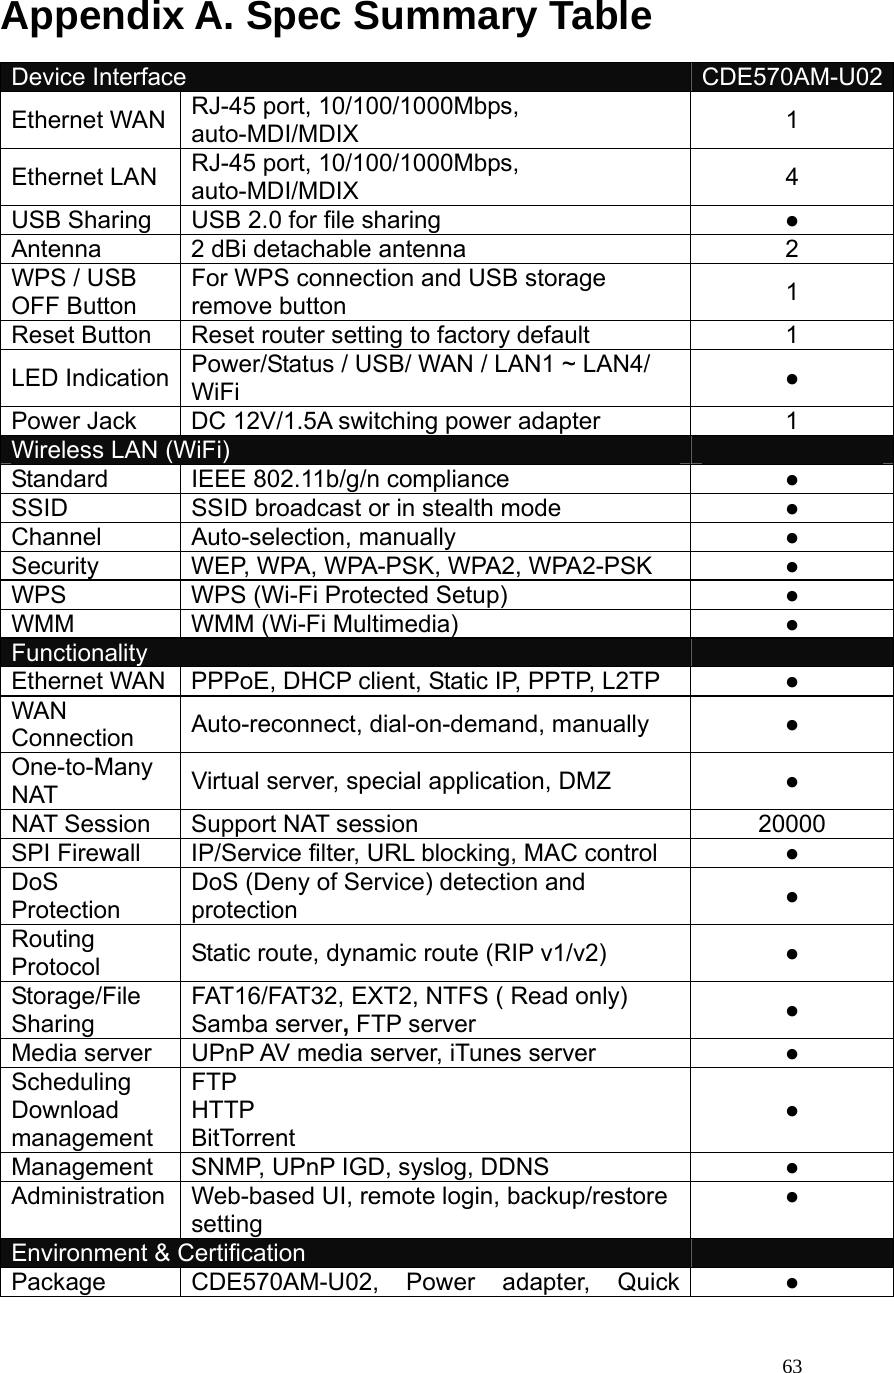  63Appendix A. Spec Summary Table Device Interface  CDE570AM-U02Ethernet WAN  RJ-45 port, 10/100/1000Mbps, auto-MDI/MDIX  1 Ethernet LAN  RJ-45 port, 10/100/1000Mbps, auto-MDI/MDIX  4 USB Sharing  USB 2.0 for file sharing    ● Antenna  2 dBi detachable antenna  2 WPS / USB OFF Button For WPS connection and USB storage remove button  1 Reset Button  Reset router setting to factory default  1 LED Indication  Power/Status / USB/ WAN / LAN1 ~ LAN4/ WiFi  ● Power Jack  DC 12V/1.5A switching power adapter  1 Wireless LAN (WiFi)   Standard IEEE 802.11b/g/n compliance  ● SSID  SSID broadcast or in stealth mode  ● Channel Auto-selection, manually  ● Security  WEP, WPA, WPA-PSK, WPA2, WPA2-PSK  ● WPS  WPS (Wi-Fi Protected Setup)  ● WMM WMM (Wi-Fi Multimedia)  ● Functionality   Ethernet WAN  PPPoE, DHCP client, Static IP, PPTP, L2TP  ● WAN Connection  Auto-reconnect, dial-on-demand, manually  ● One-to-Many NAT  Virtual server, special application, DMZ    ● NAT Session  Support NAT session  20000 SPI Firewall  IP/Service filter, URL blocking, MAC control  ● DoS Protection DoS (Deny of Service) detection and protection  ● Routing Protocol  Static route, dynamic route (RIP v1/v2)  ● Storage/File Sharing FAT16/FAT32, EXT2, NTFS ( Read only) Samba server, FTP server  ● Media server  UPnP AV media server, iTunes server  ● Scheduling Download management FTP HTTP BitTorrent ● Management  SNMP, UPnP IGD, syslog, DDNS      ● Administration  Web-based UI, remote login, backup/restore setting ● Environment &amp; Certification   Package CDE570AM-U02, Power adapter, Quick  ● 